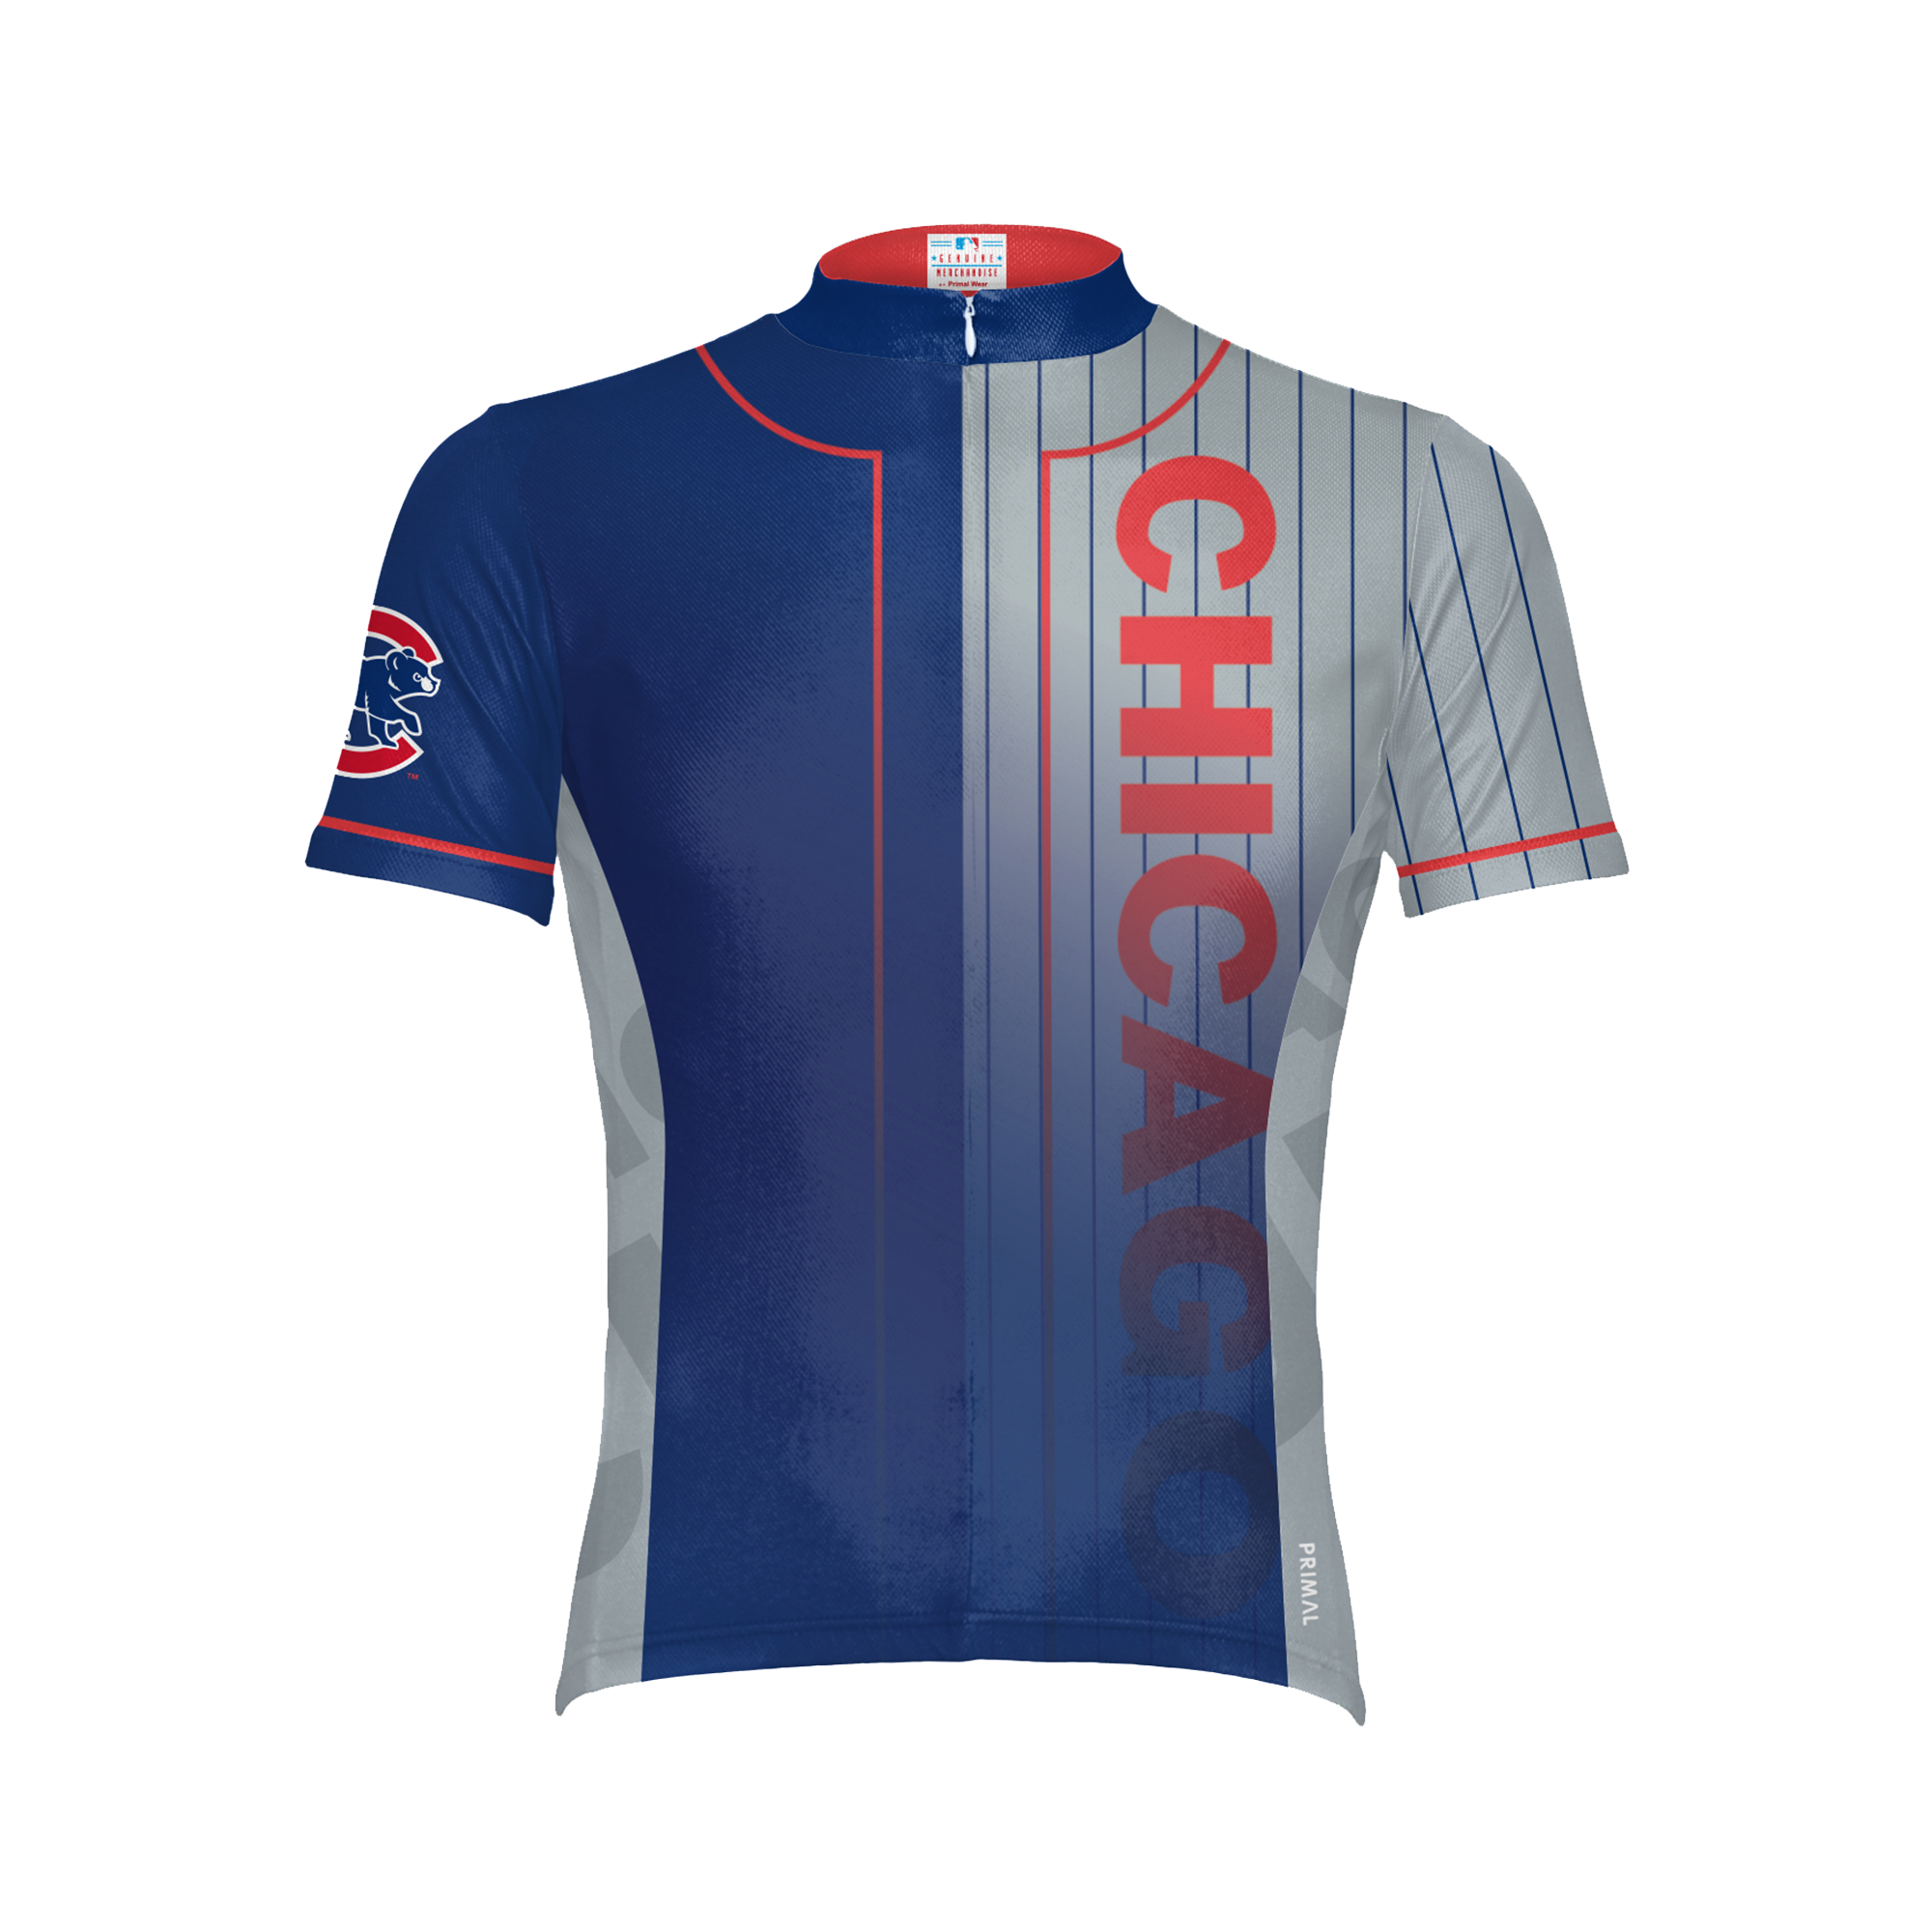 Official Chicago Cubs Gear, Cubs Jerseys, Store, Chicago Pro Shop, Apparel